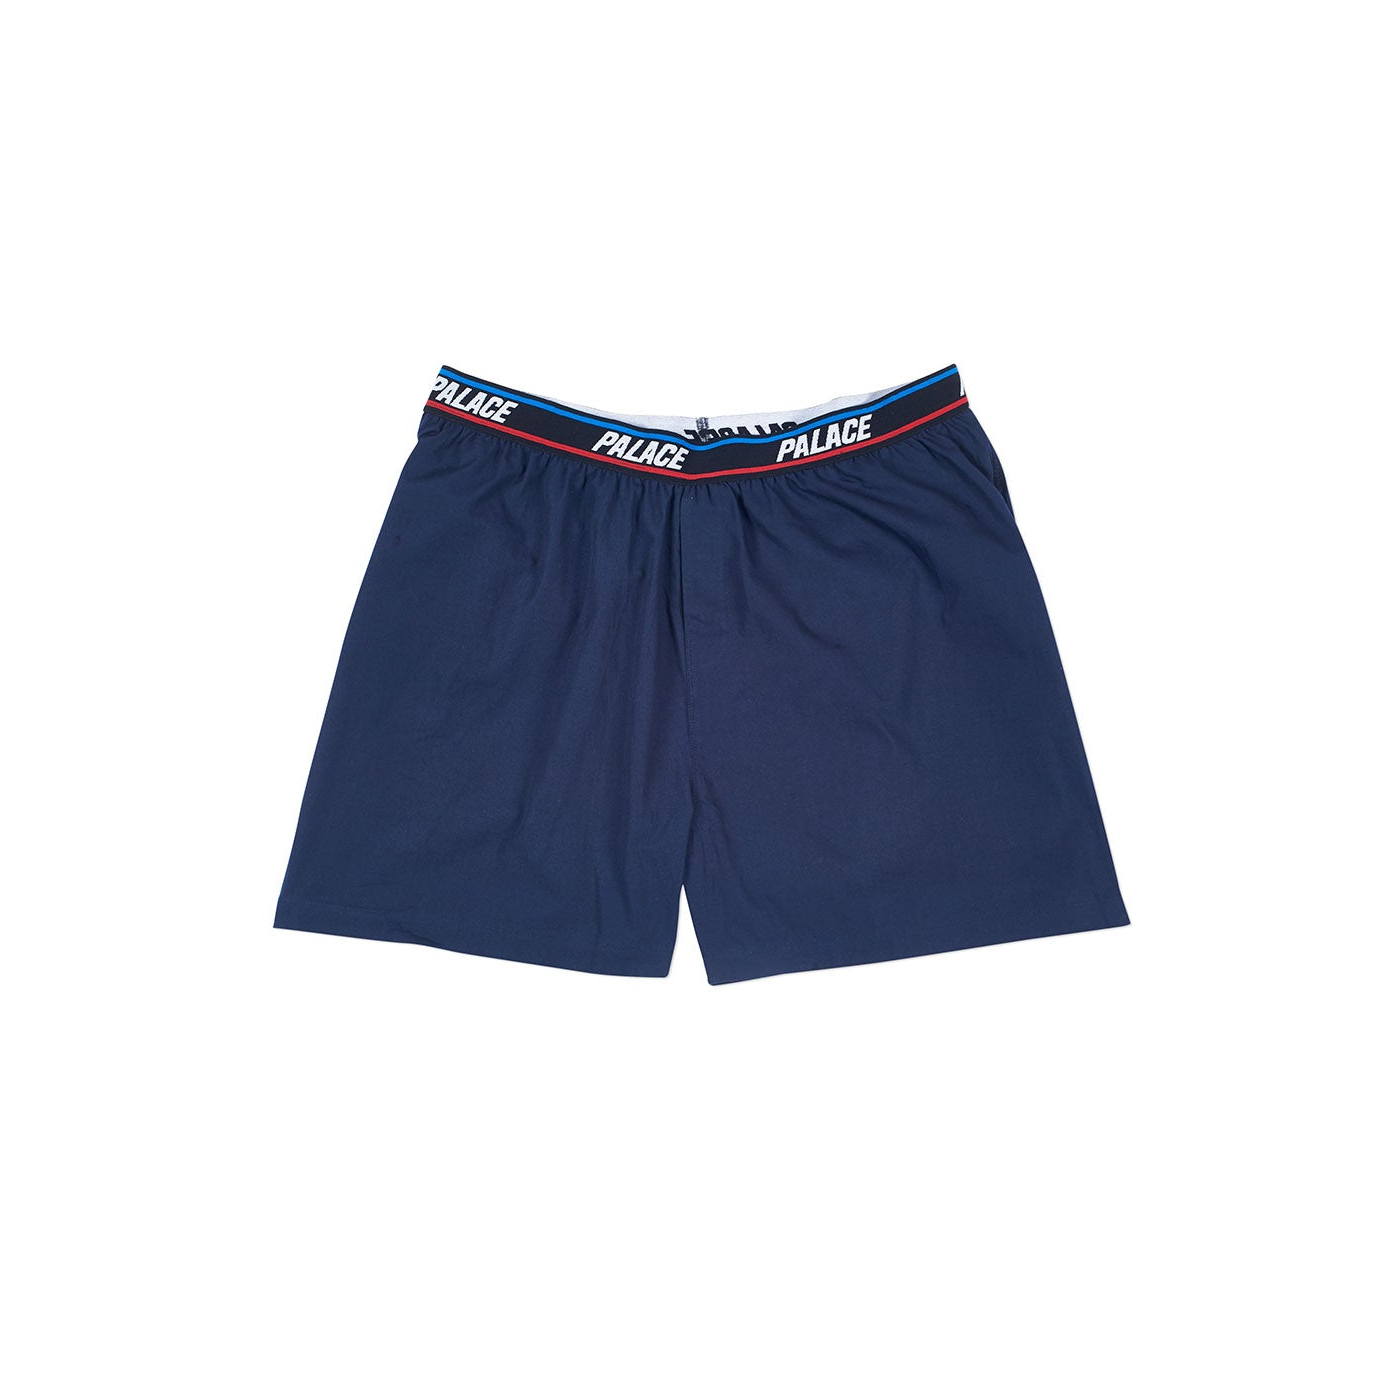 Thumbnail BASICALLY A PACK OF BOXERS BLACK / NAVY / WHITE one color